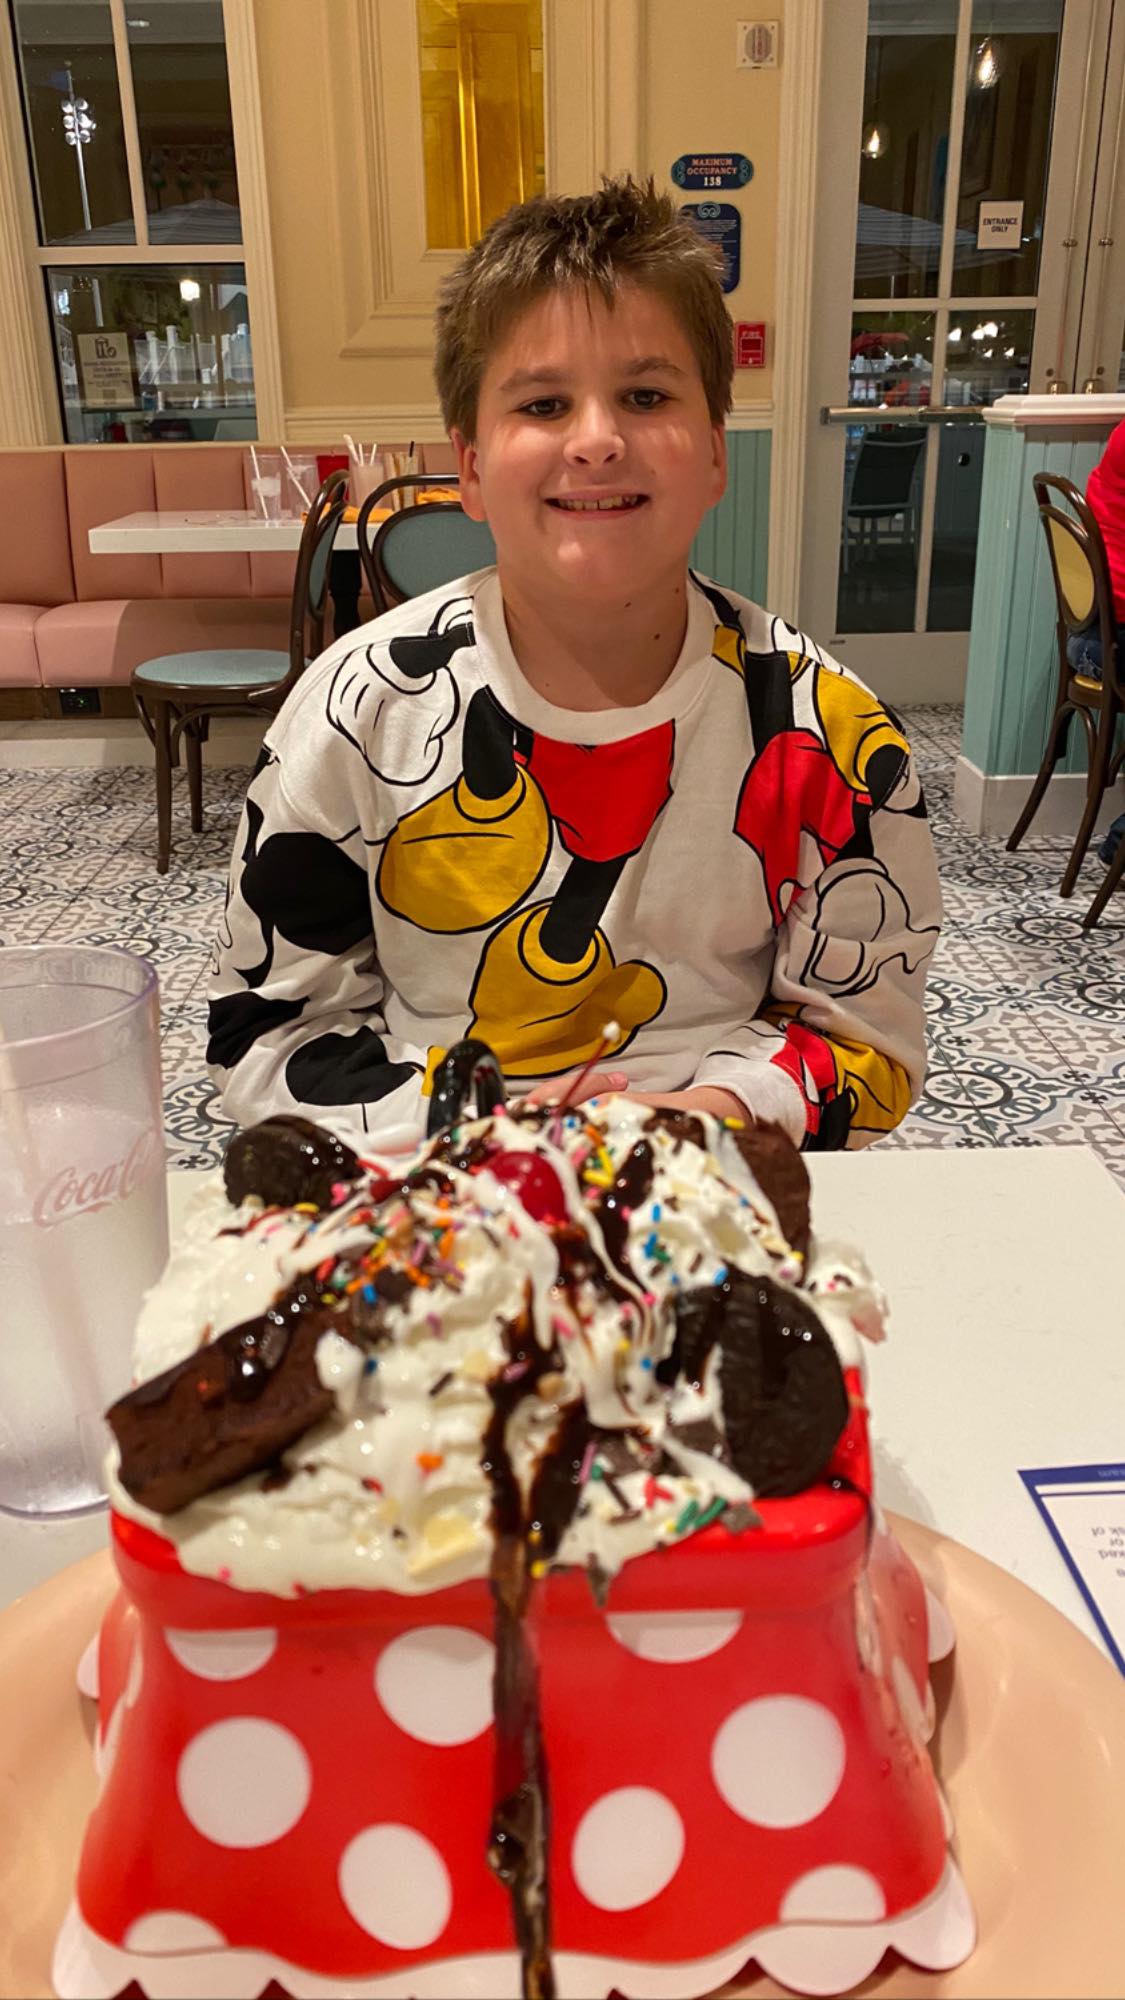 Ice cream kitchen sink- beaches and cream dining review